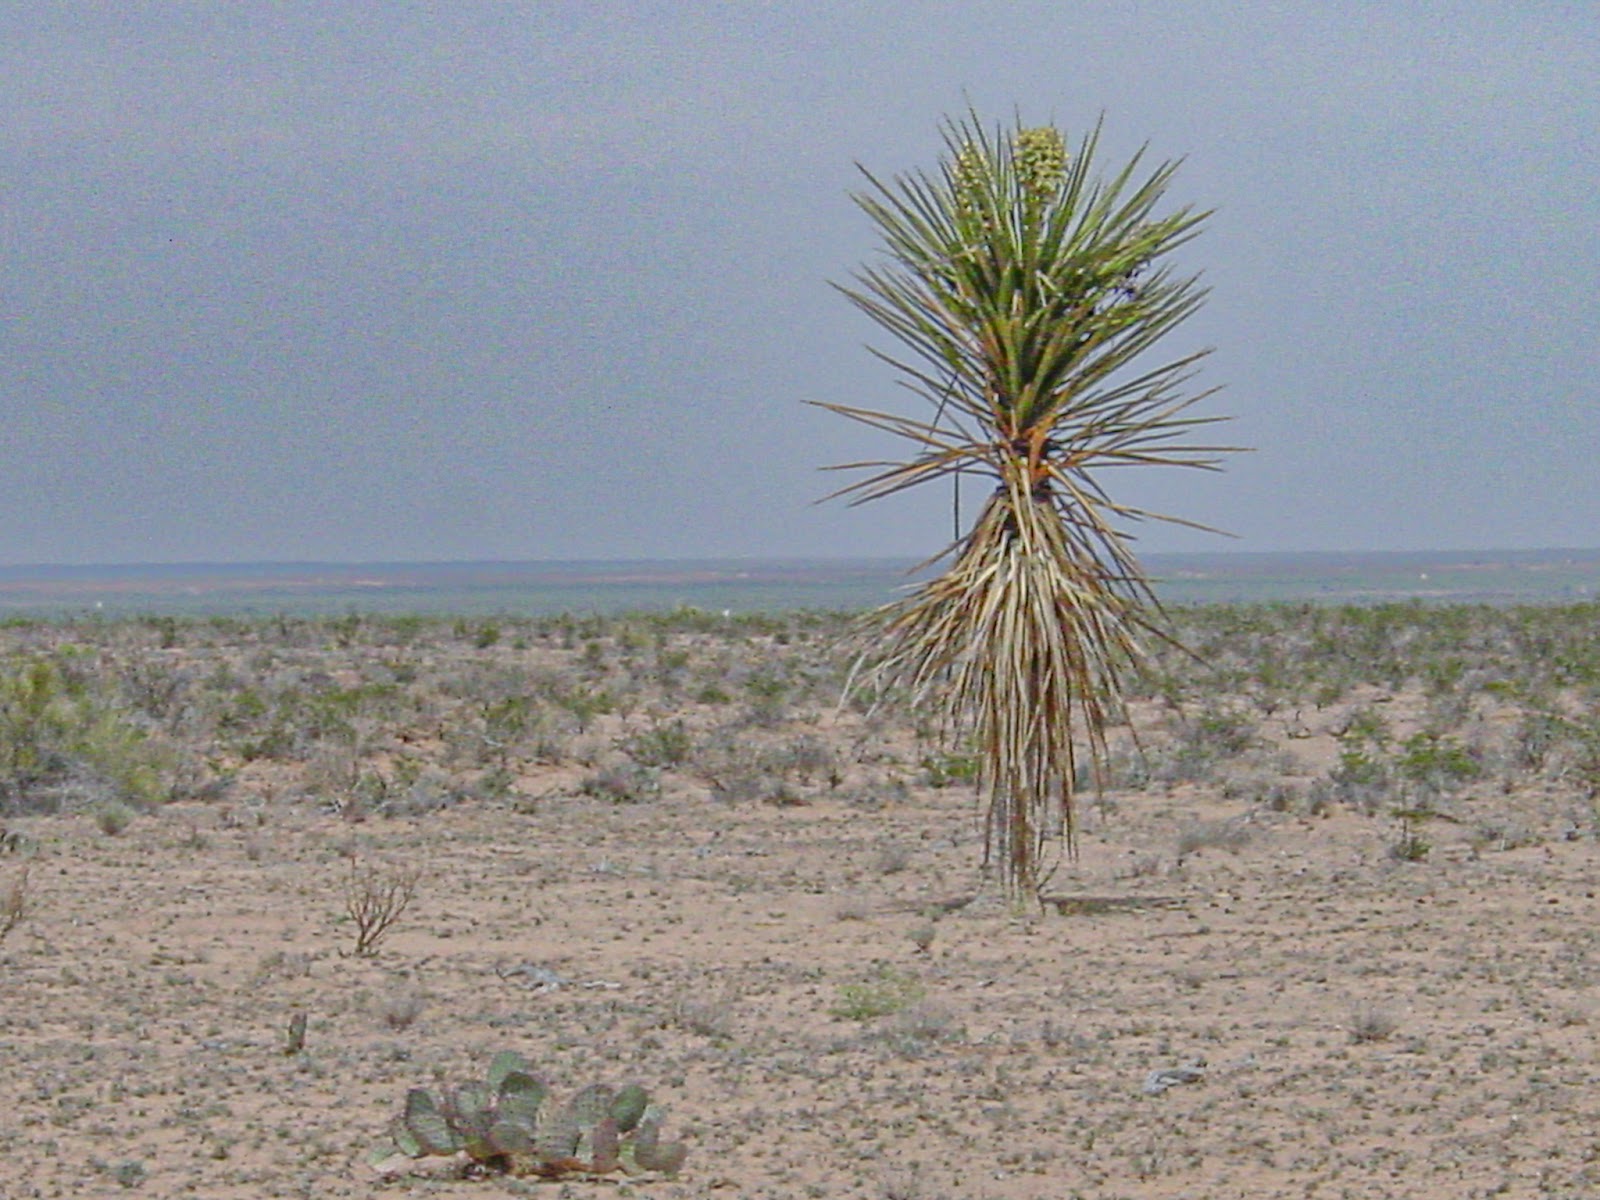 A lone yucca tree is visible in very dry desert landscape with little on the horizon. 